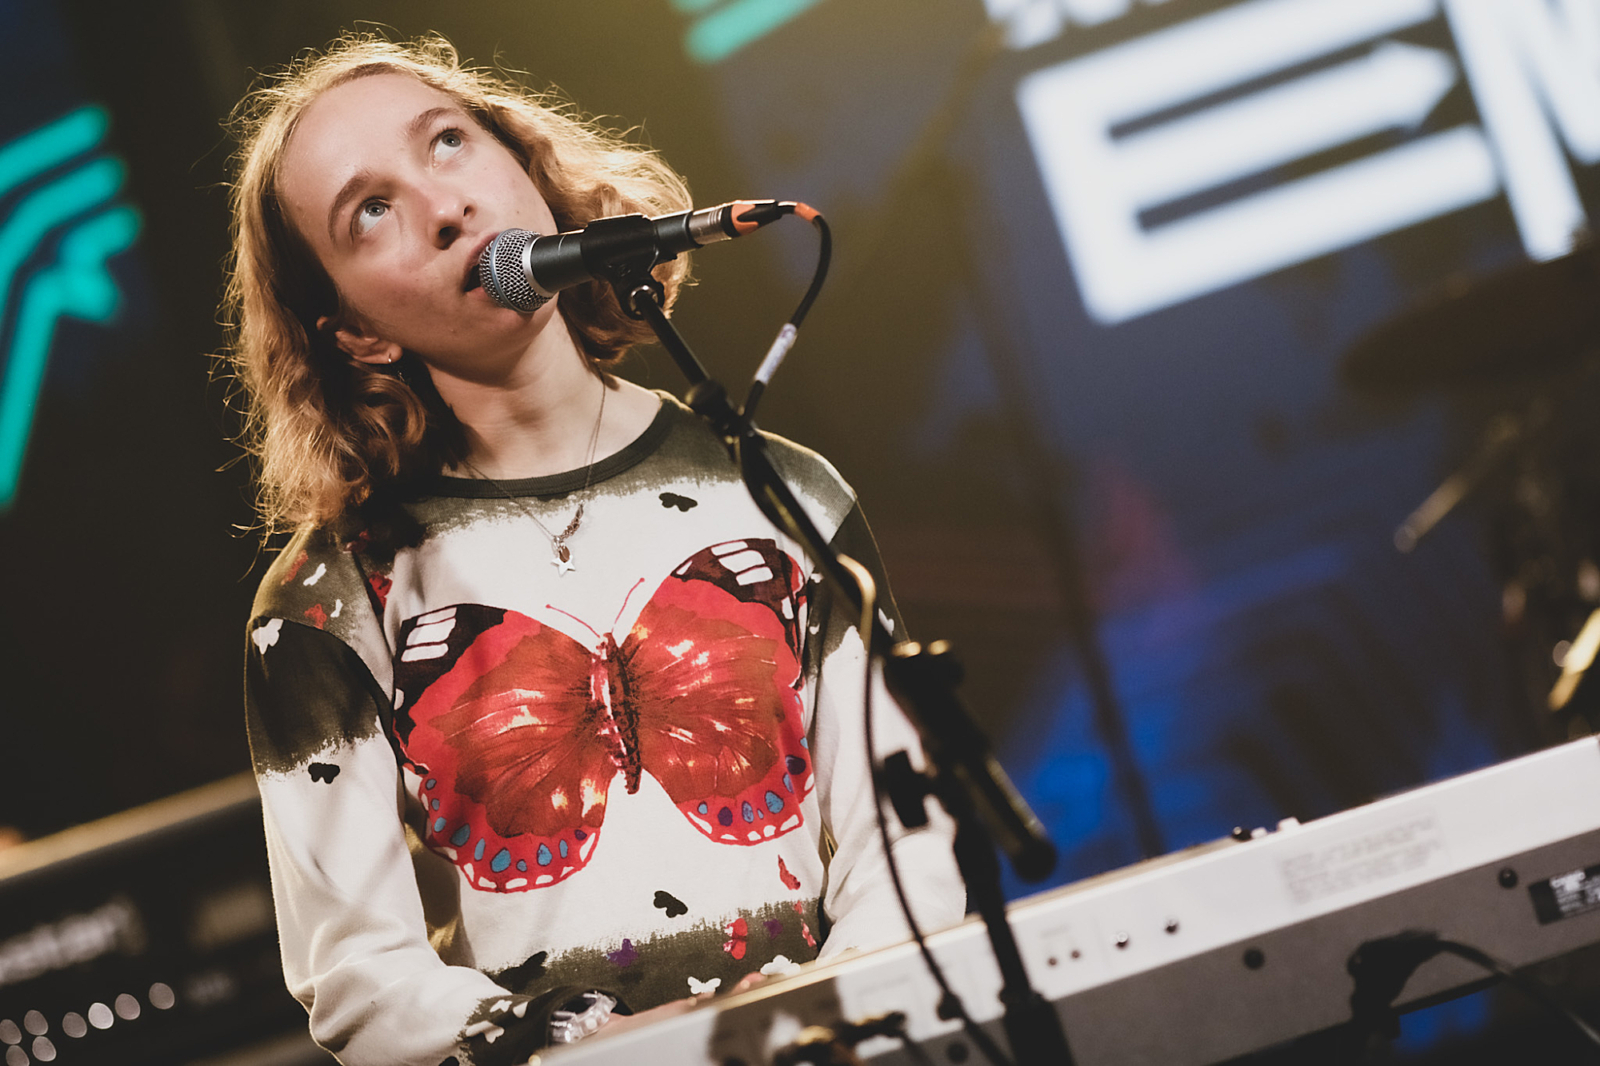 Revisit SXSW 2021 highlights from Drug Store Romeos, Matilda Mann and more